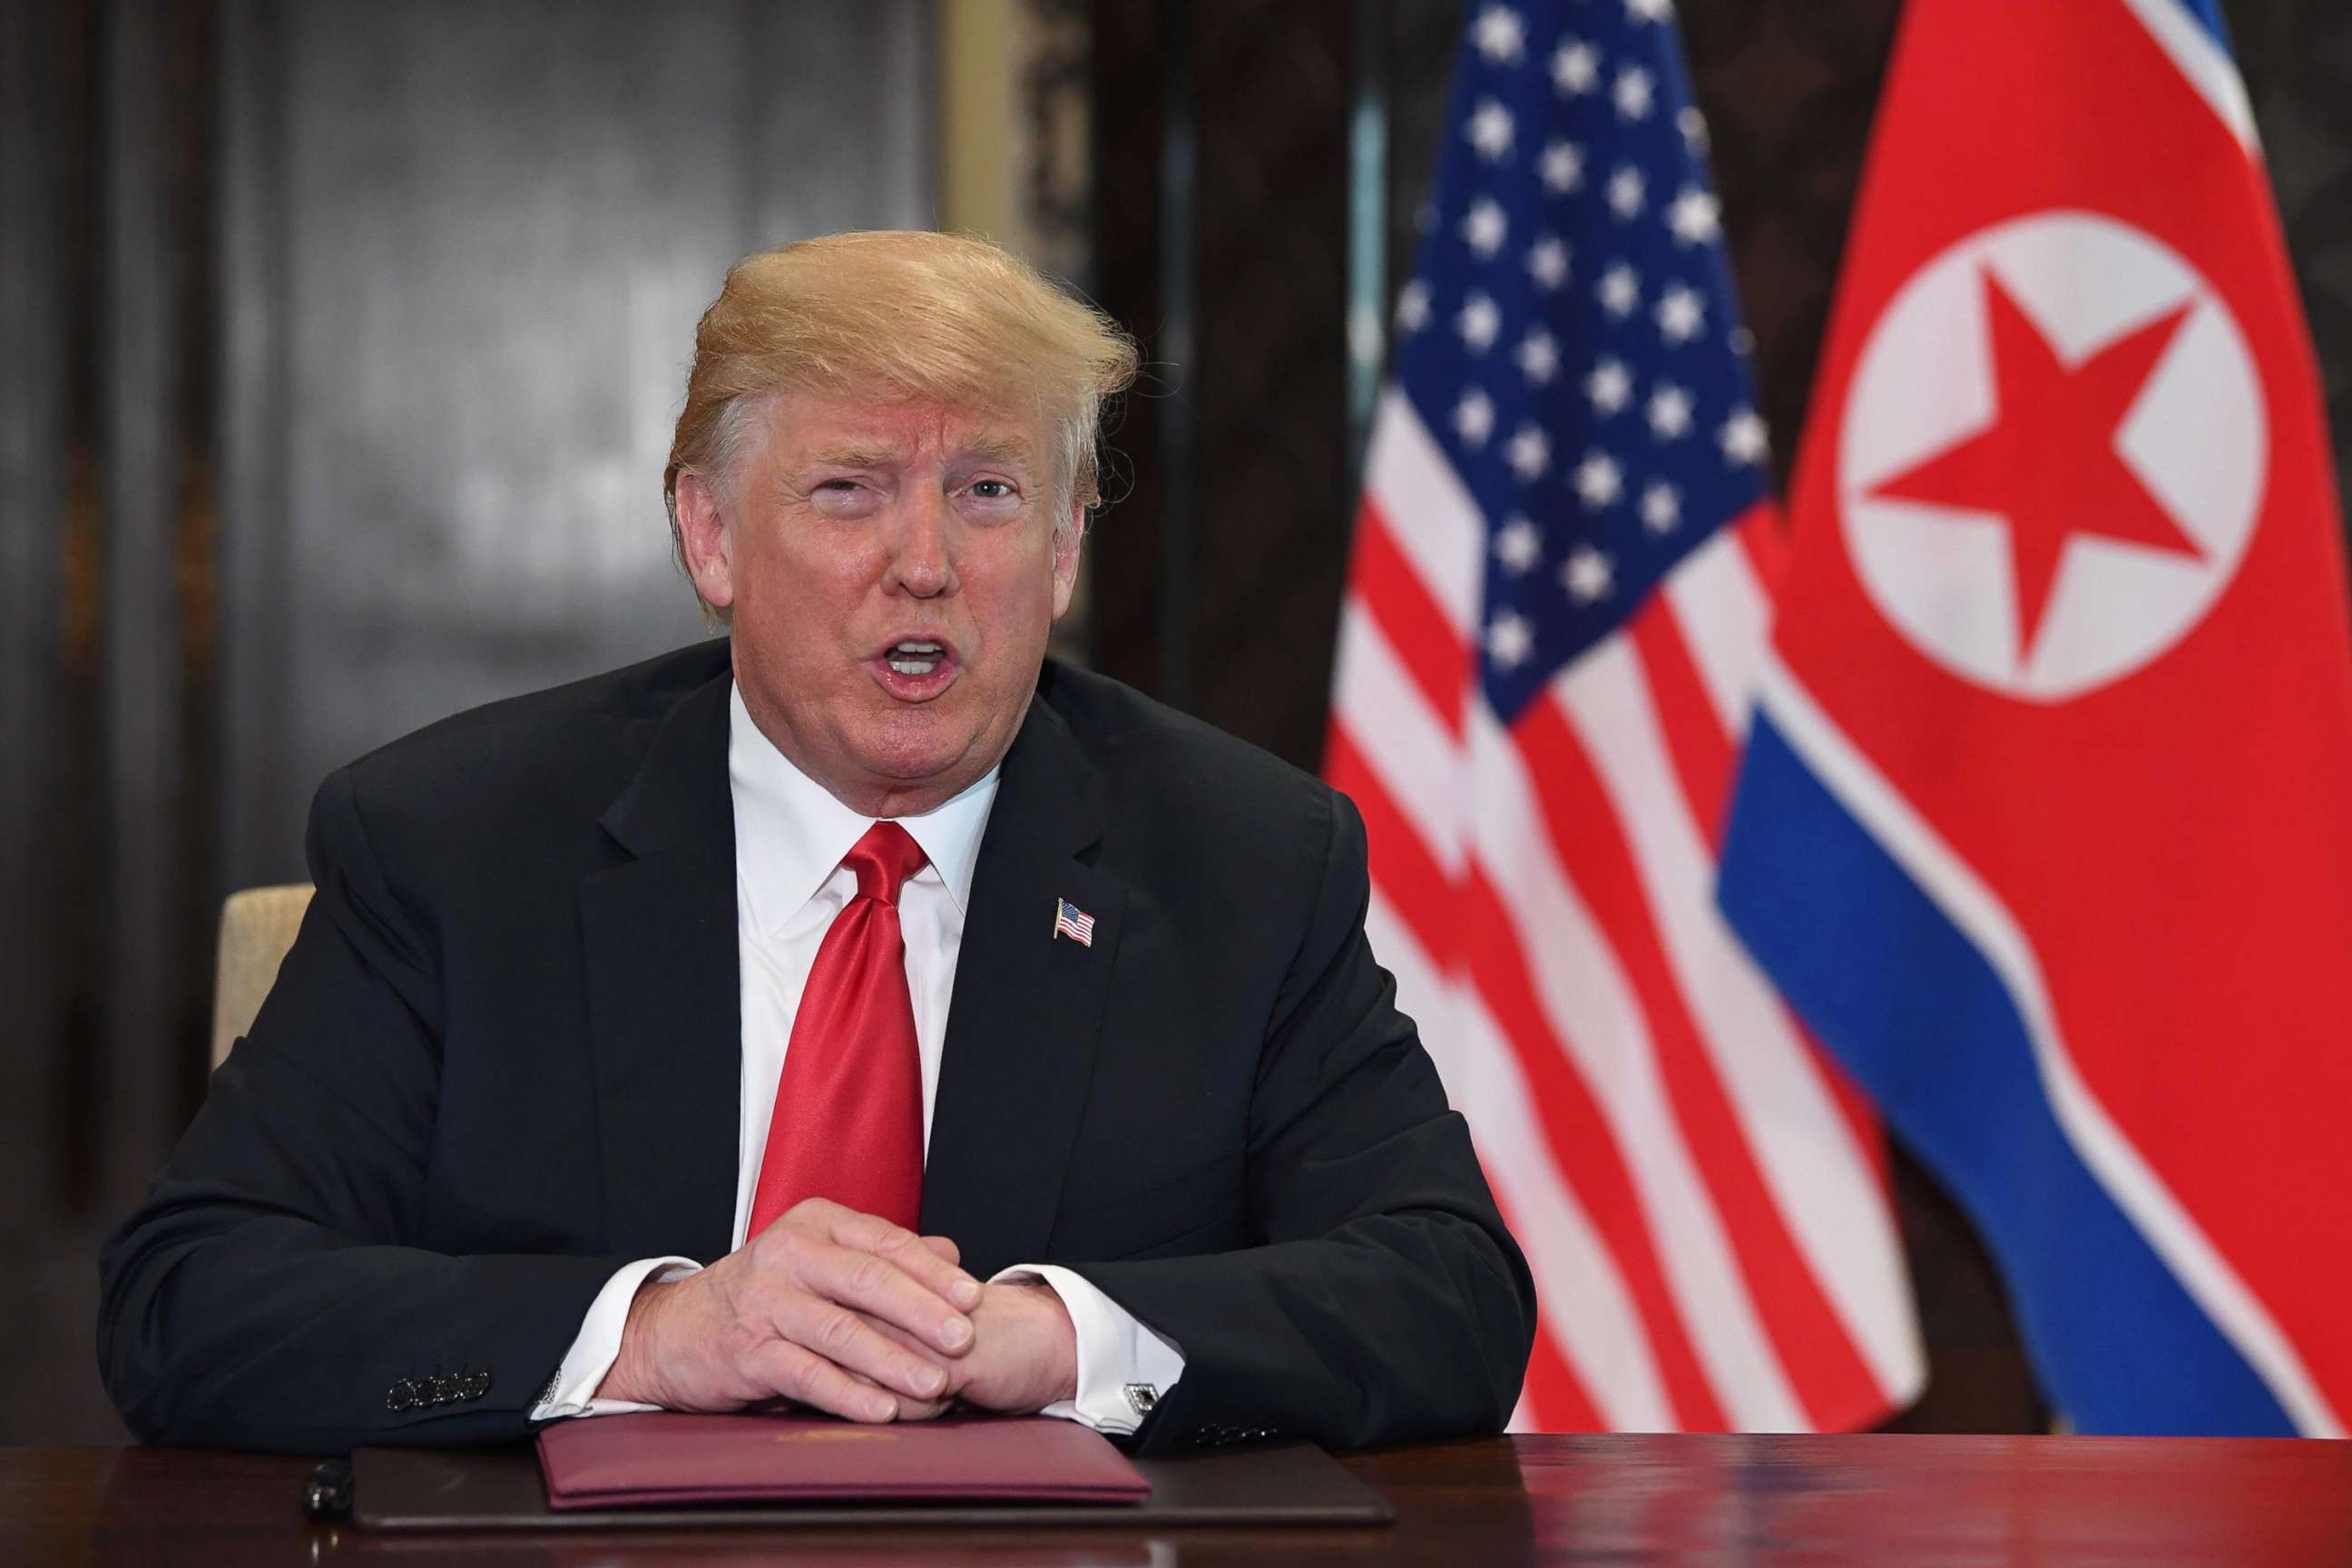 PHOTO: US President Donald Trump speaks at a signing ceremony with North Korea's leader Kim Jong Un during their historic summit, at the Capella Hotel on Sentosa island in Singapore on June 12, 2018.